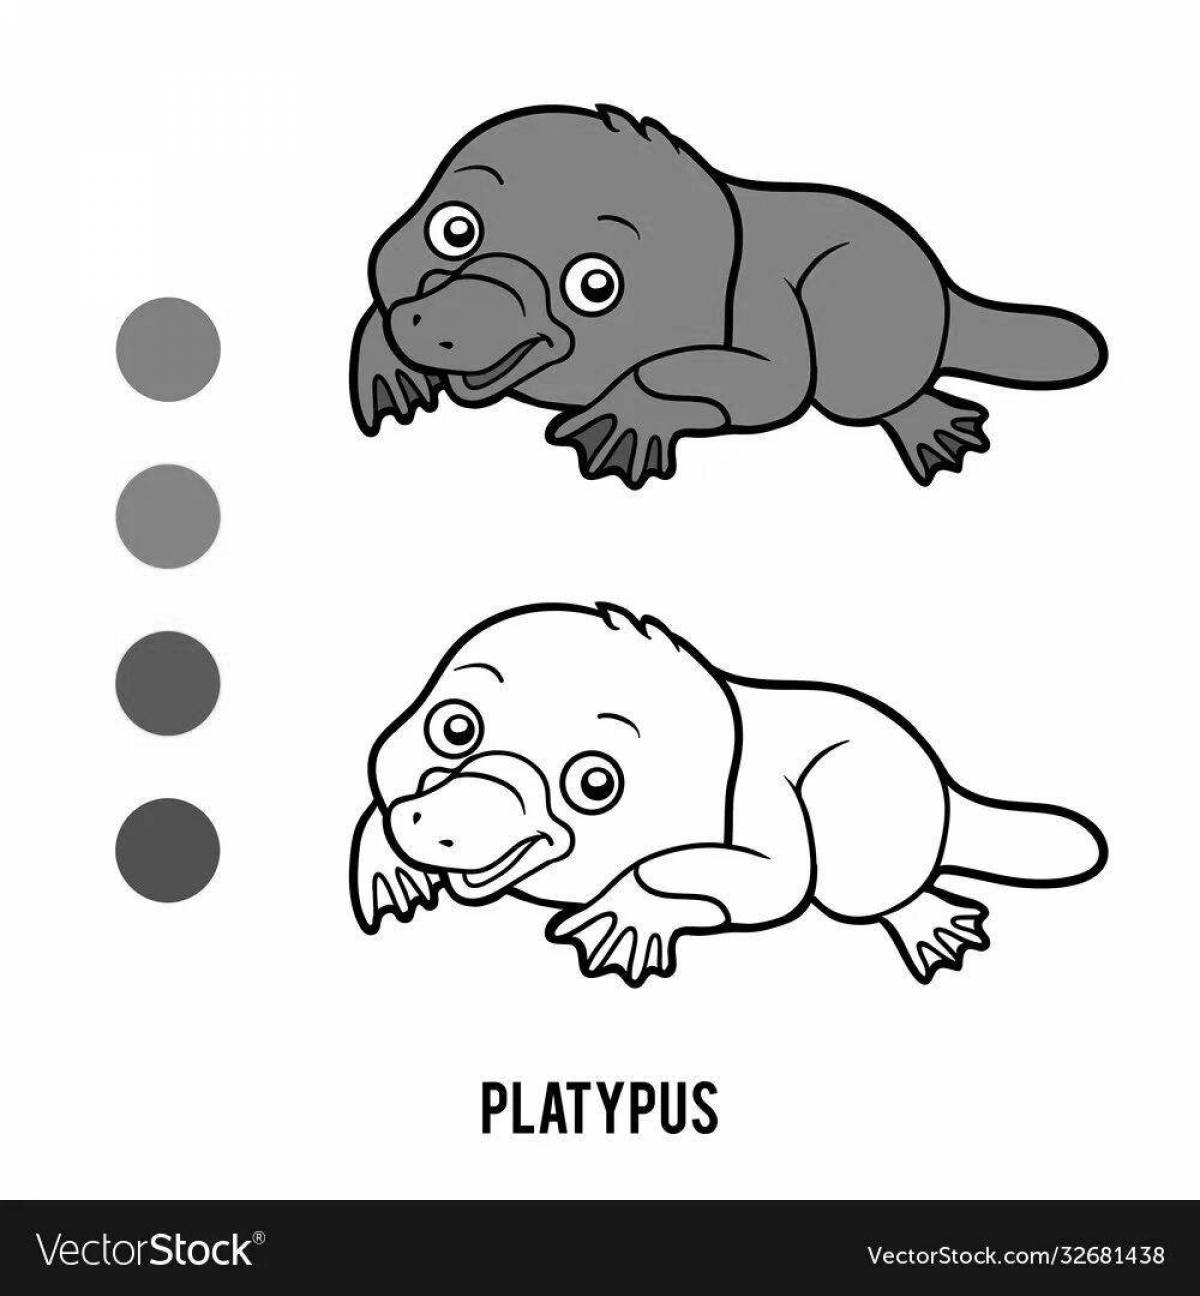 Delightful platypus coloring book for kids